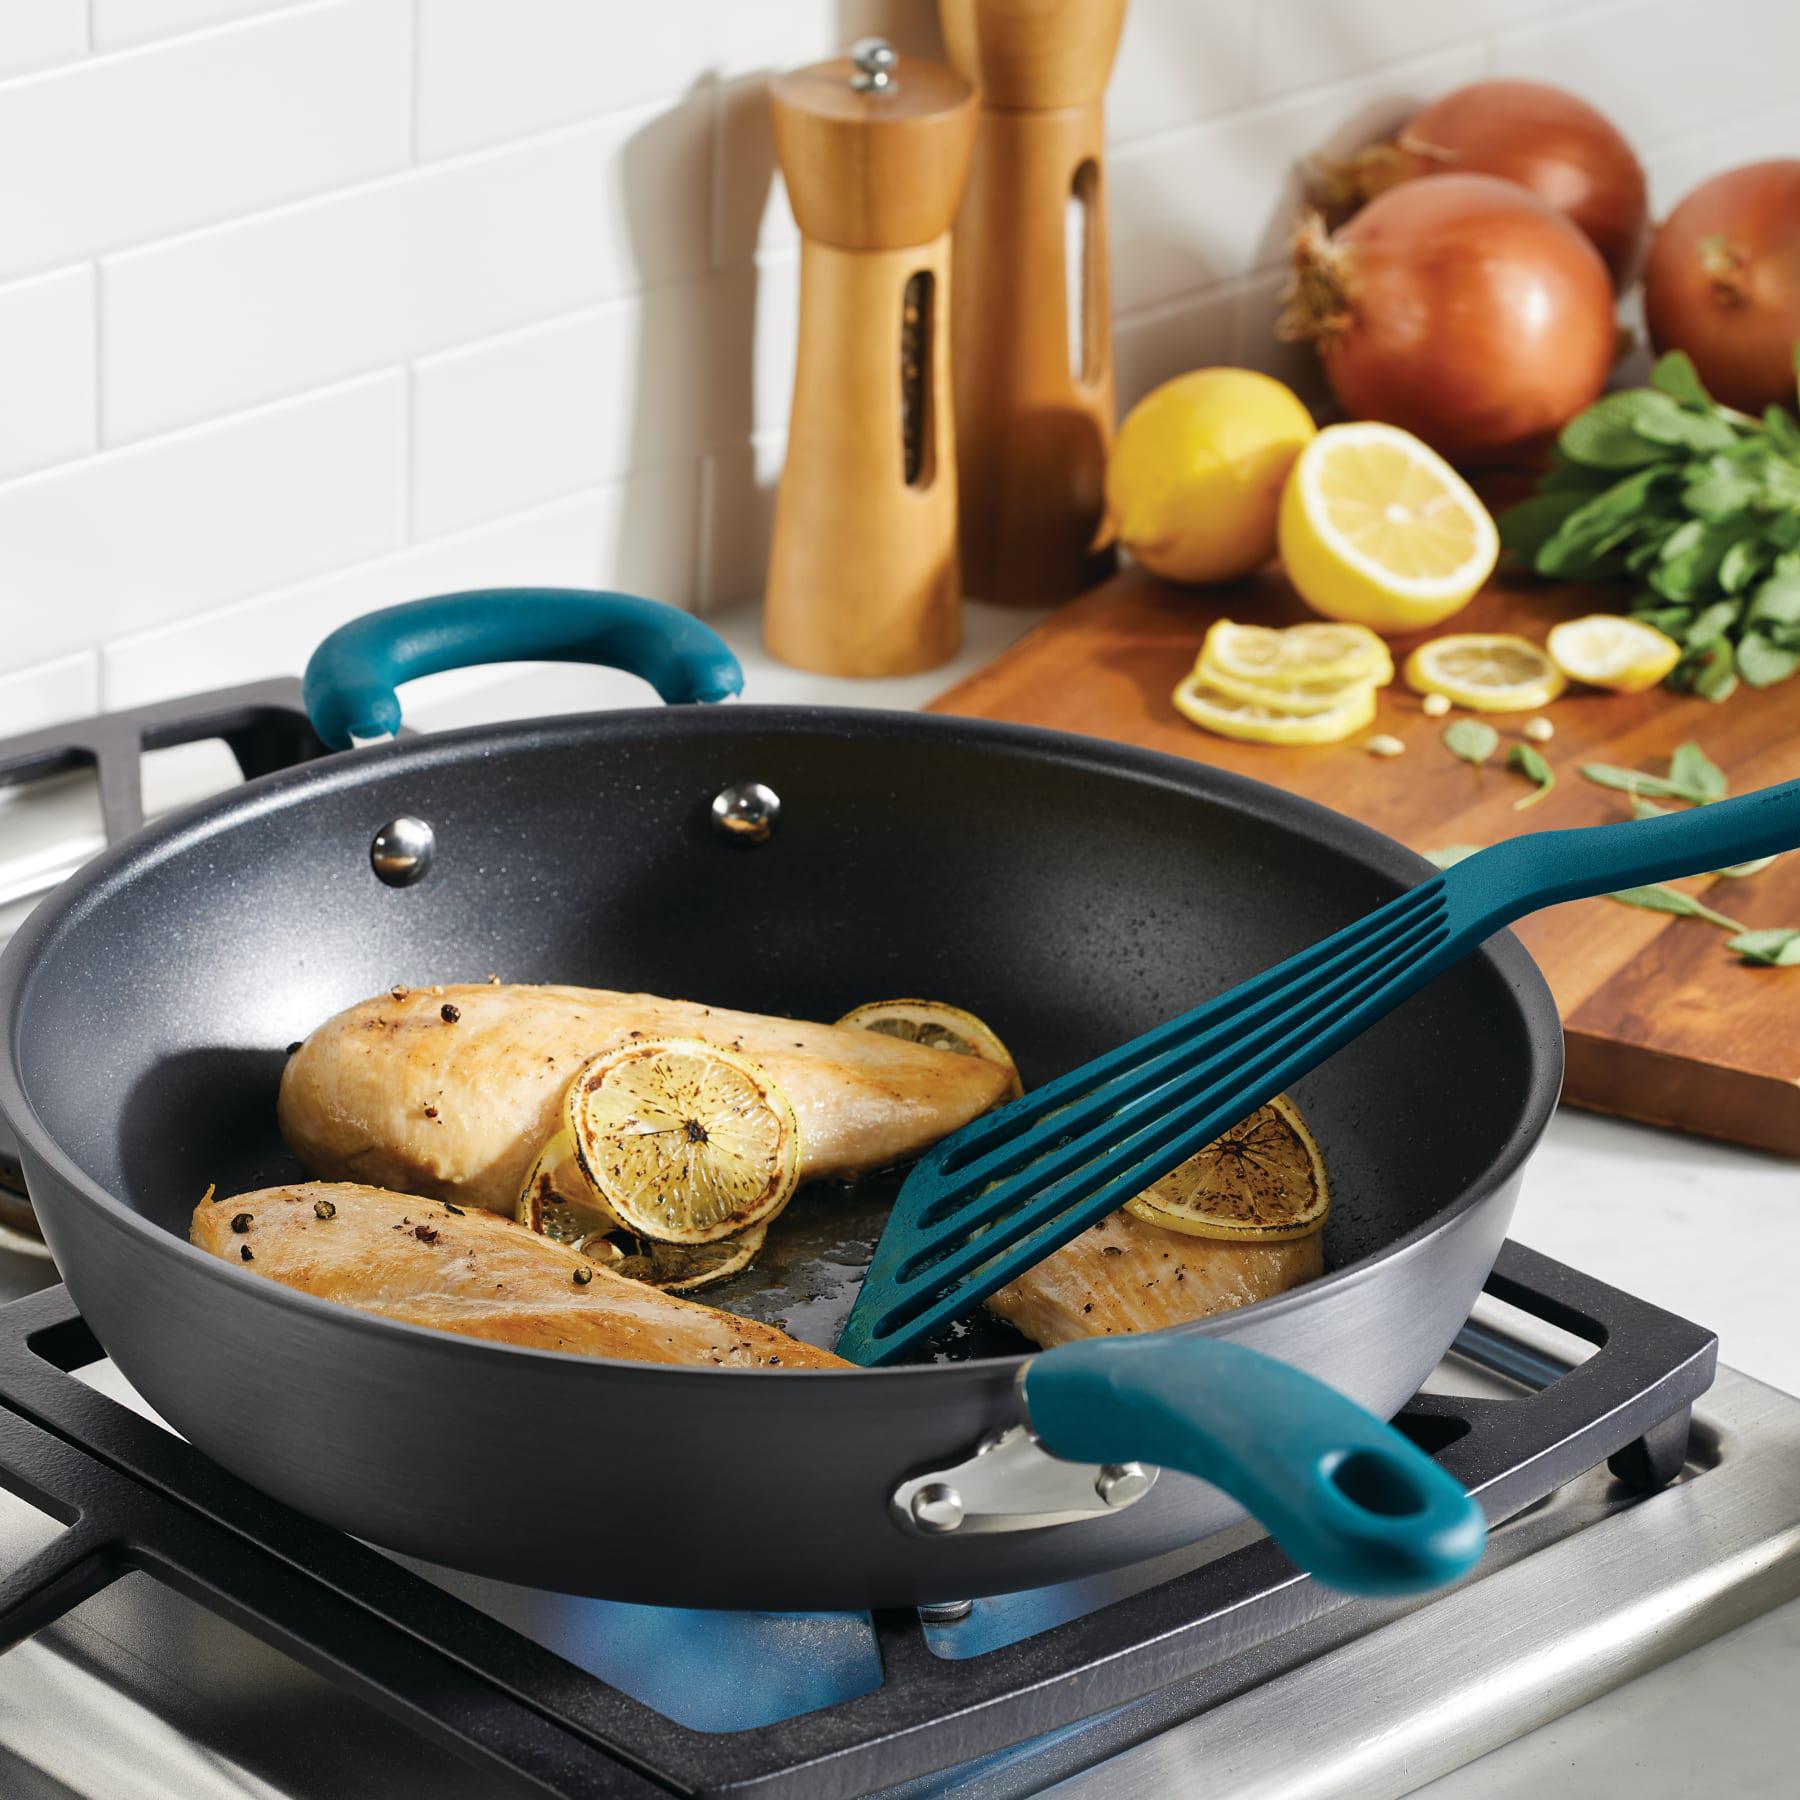 12-Inch Deep Frying Pan with Lid and Helper Handle